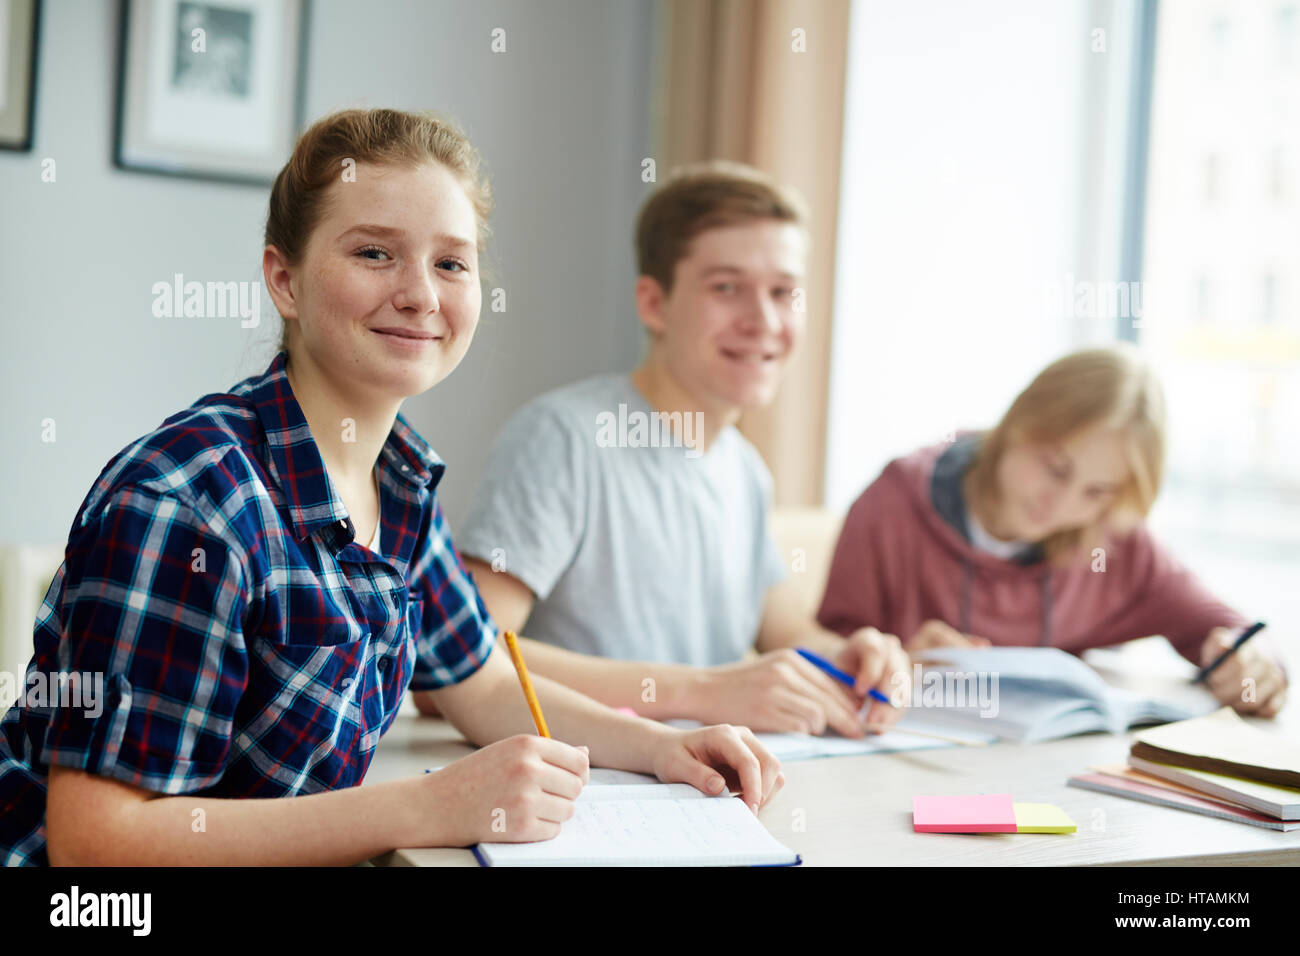 Happy girl carrying out task at lesson and looking at camera Stock Photo